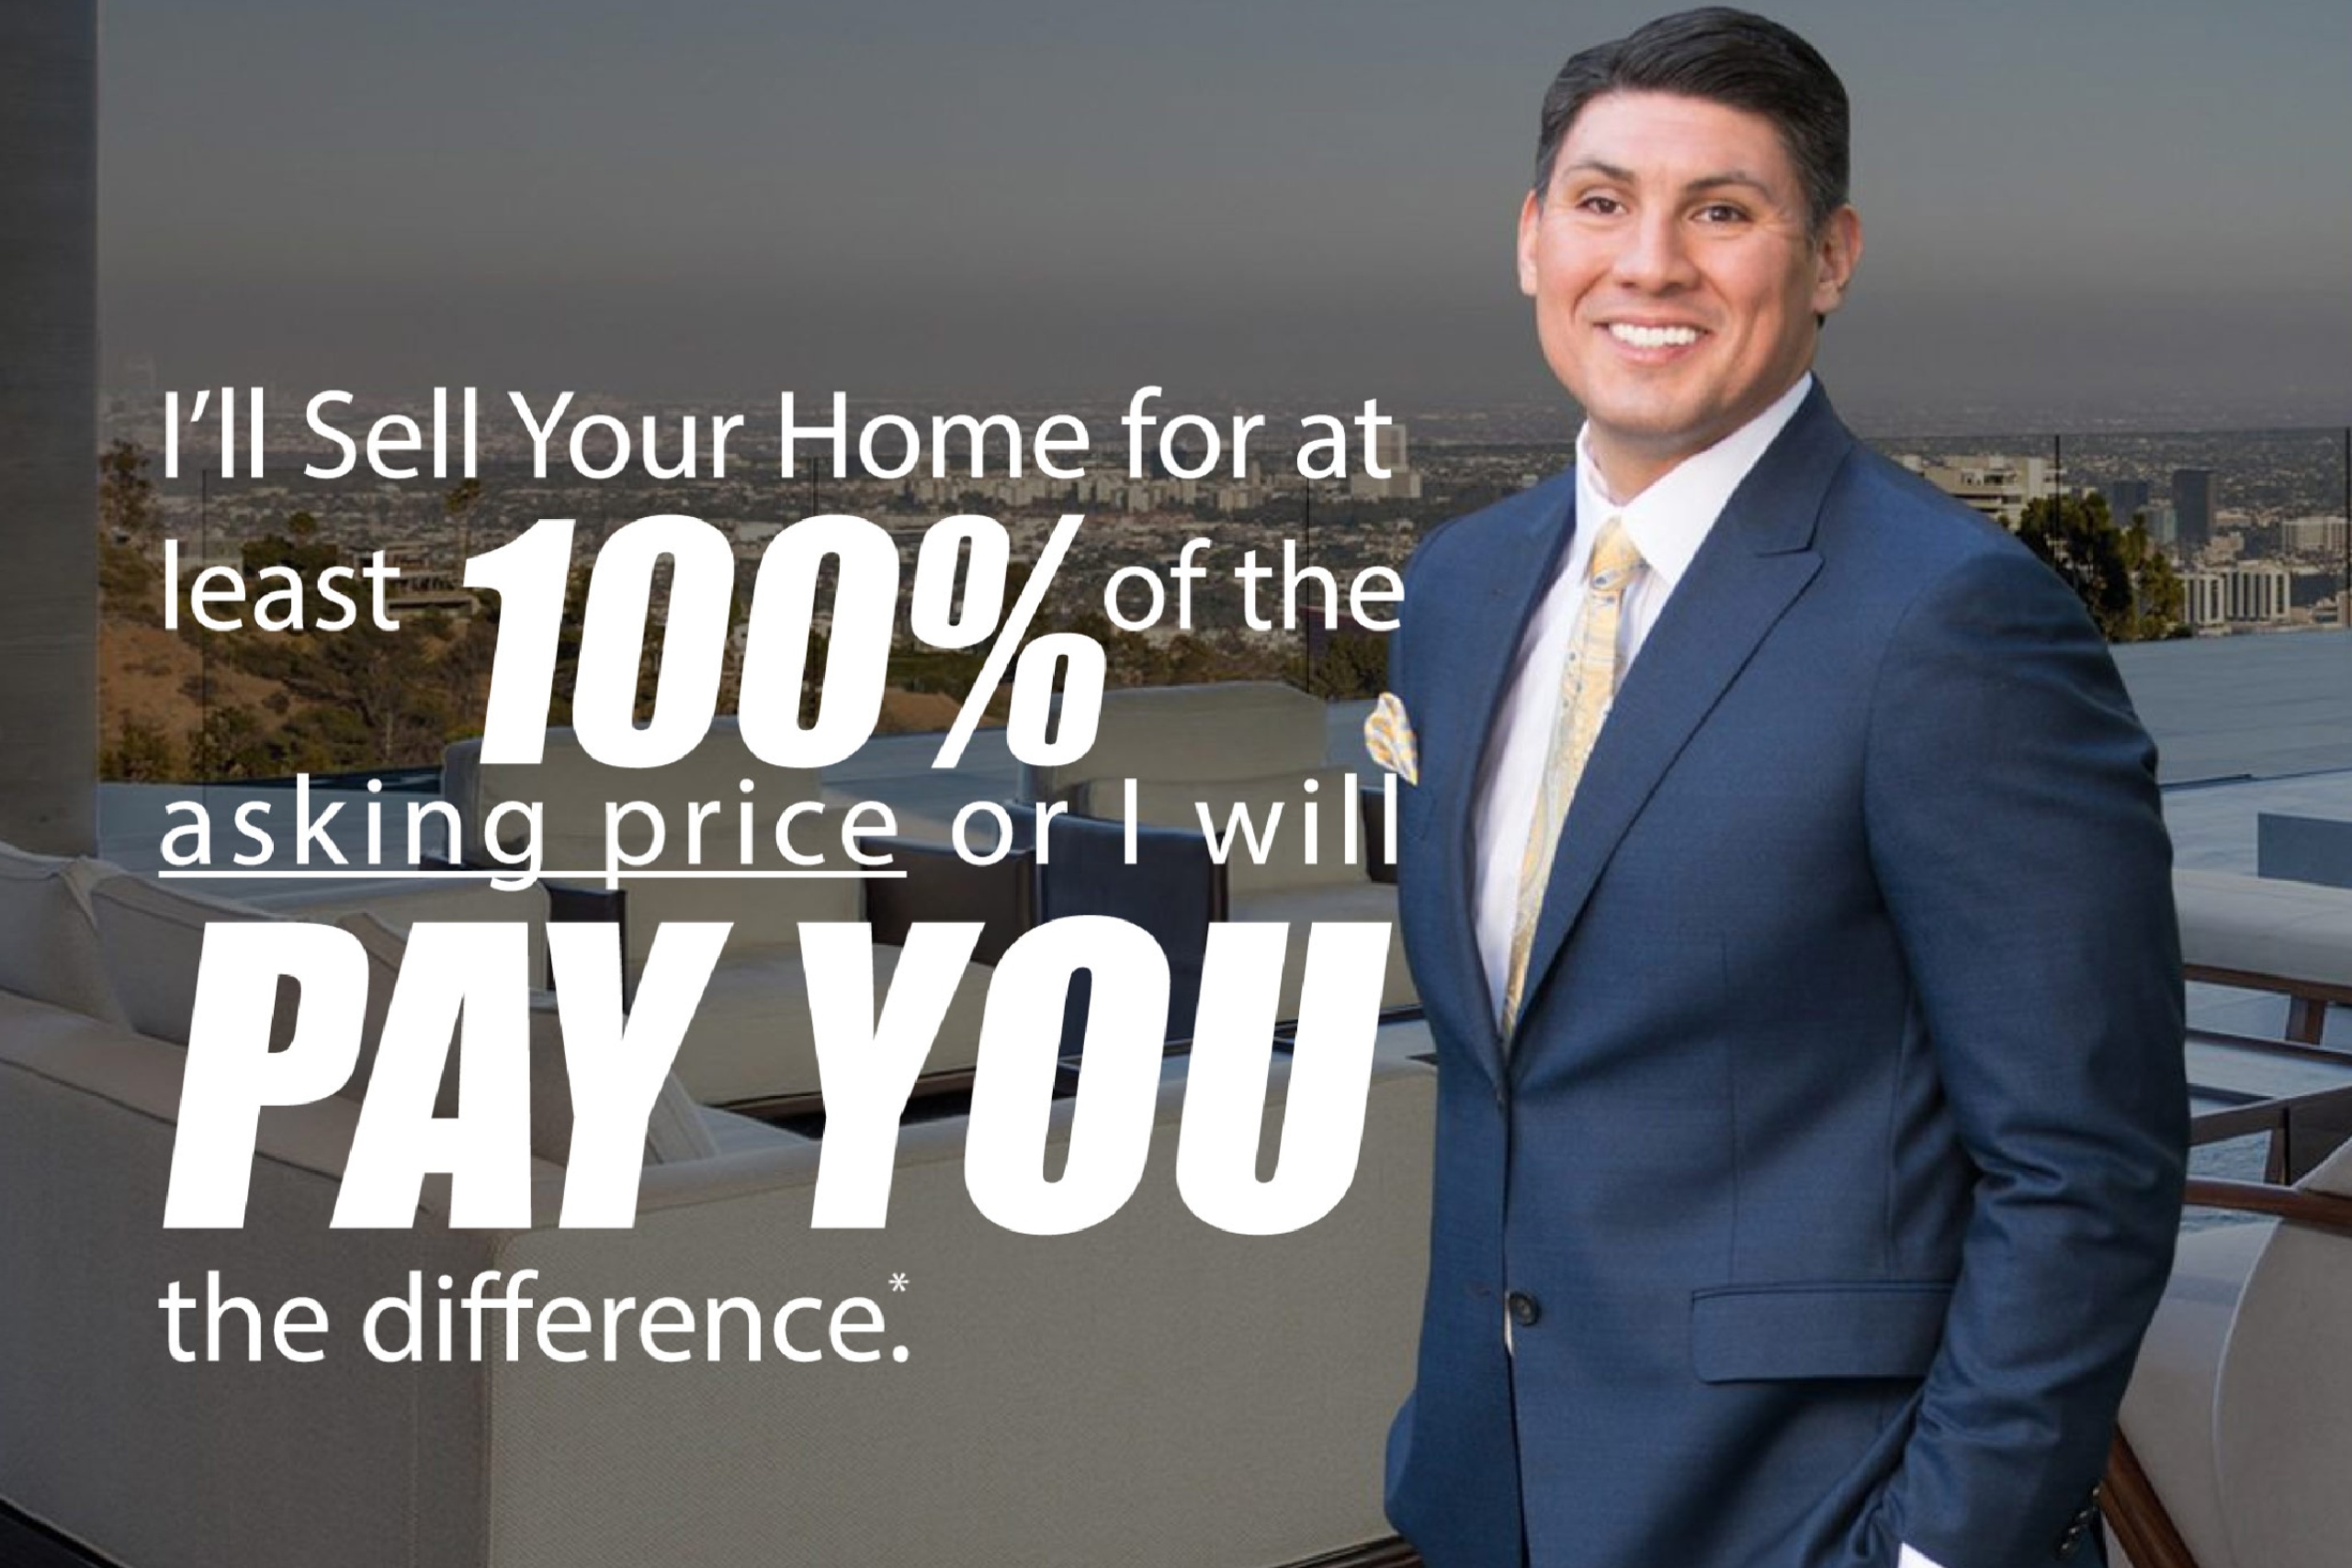 I’ll Sell Your Home for at least 100% of Asking Price OR I’ll Pay You the Difference! Best real estate agent in los angeles best realtor in los angeles celebrity real estate agent luxury real estate agent pro athlete relocation corporate relocation worldwide relocation global mobility